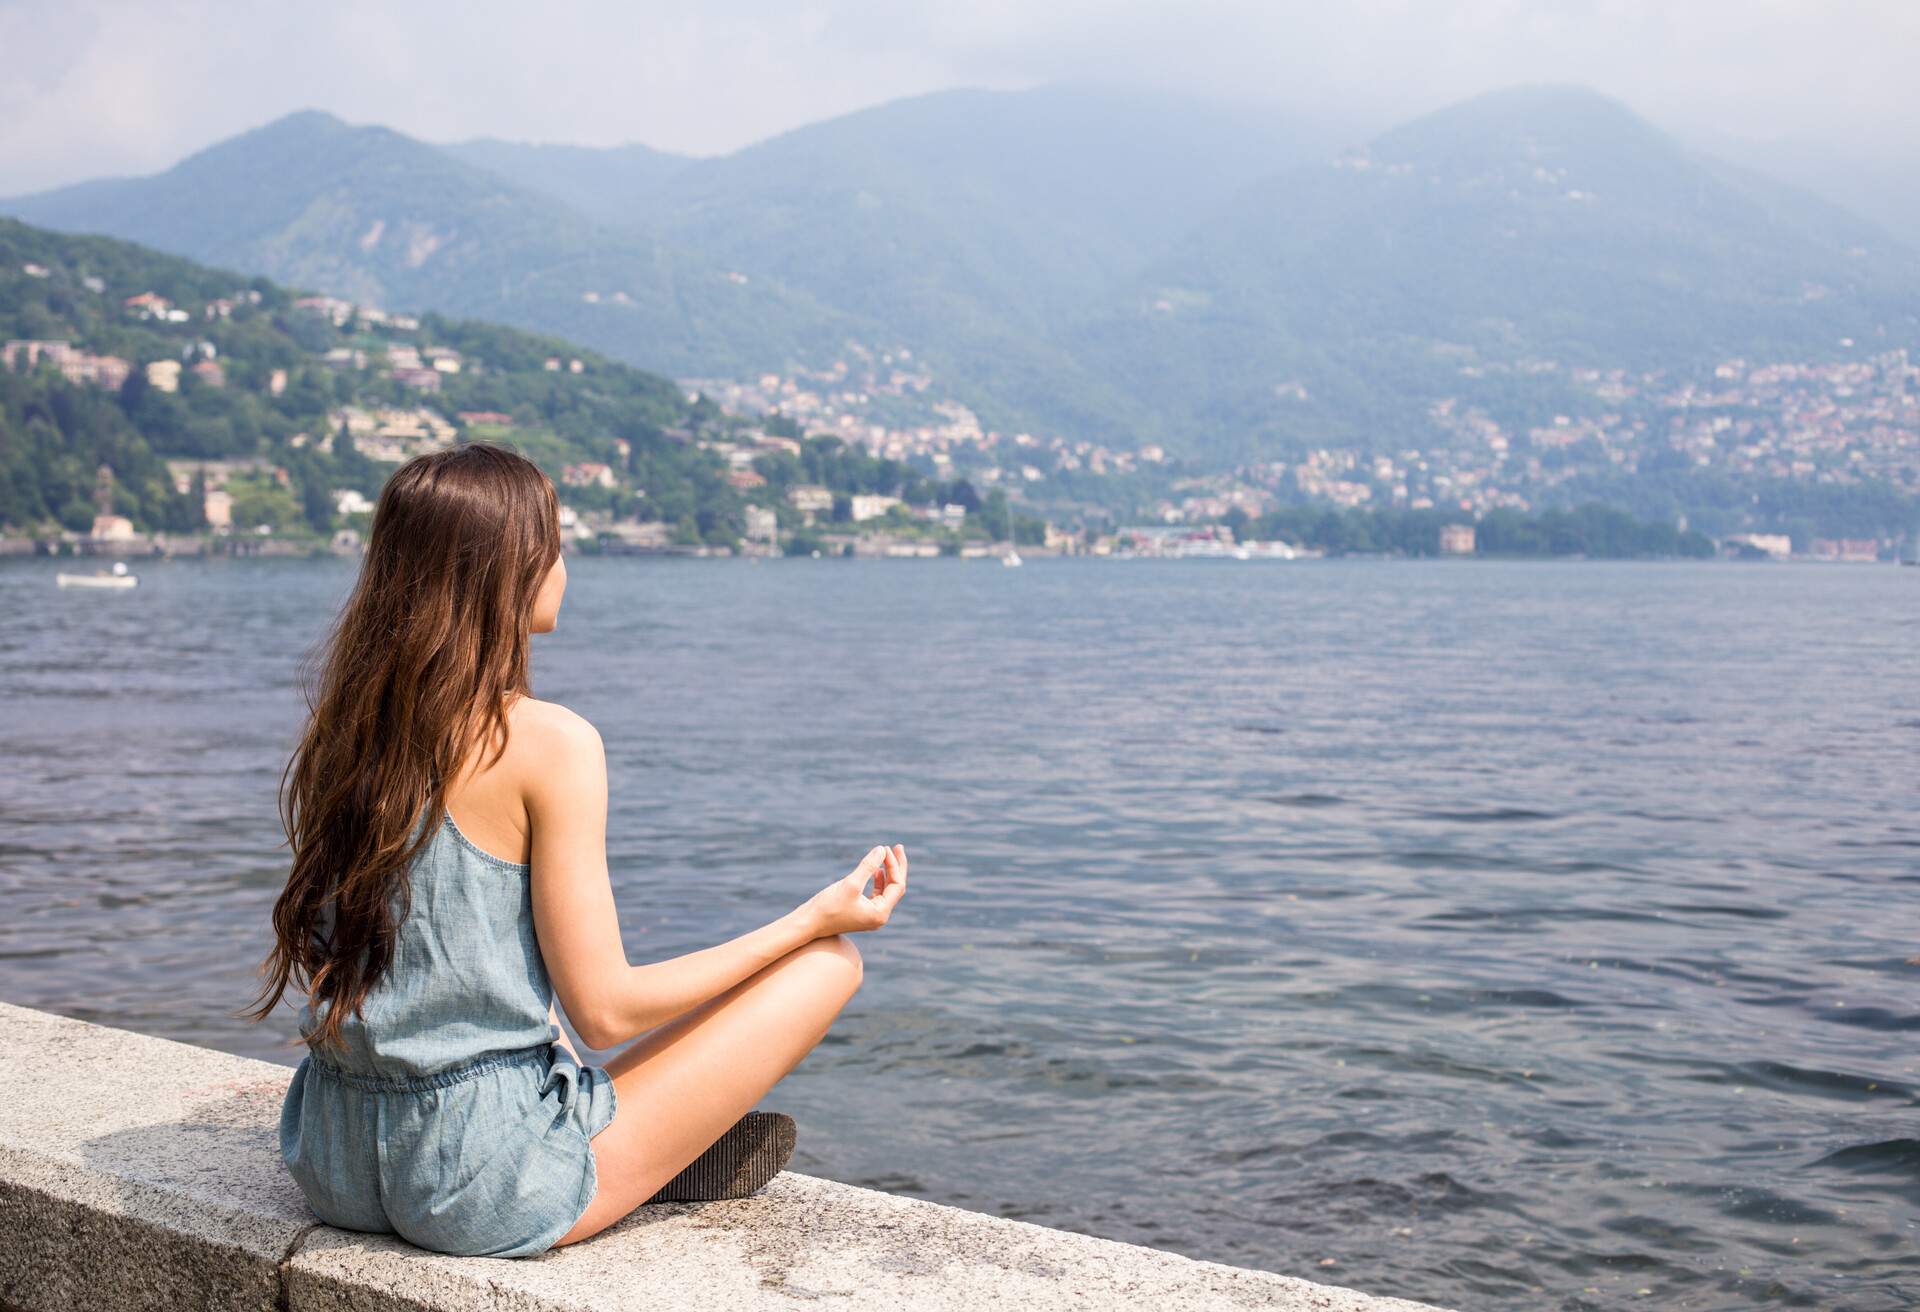 A girl sits serenely by the stone railing, assuming a meditation pose, while a coastal town nestled amidst verdant hills gracefully reflects across the tranquil waters of the lake.